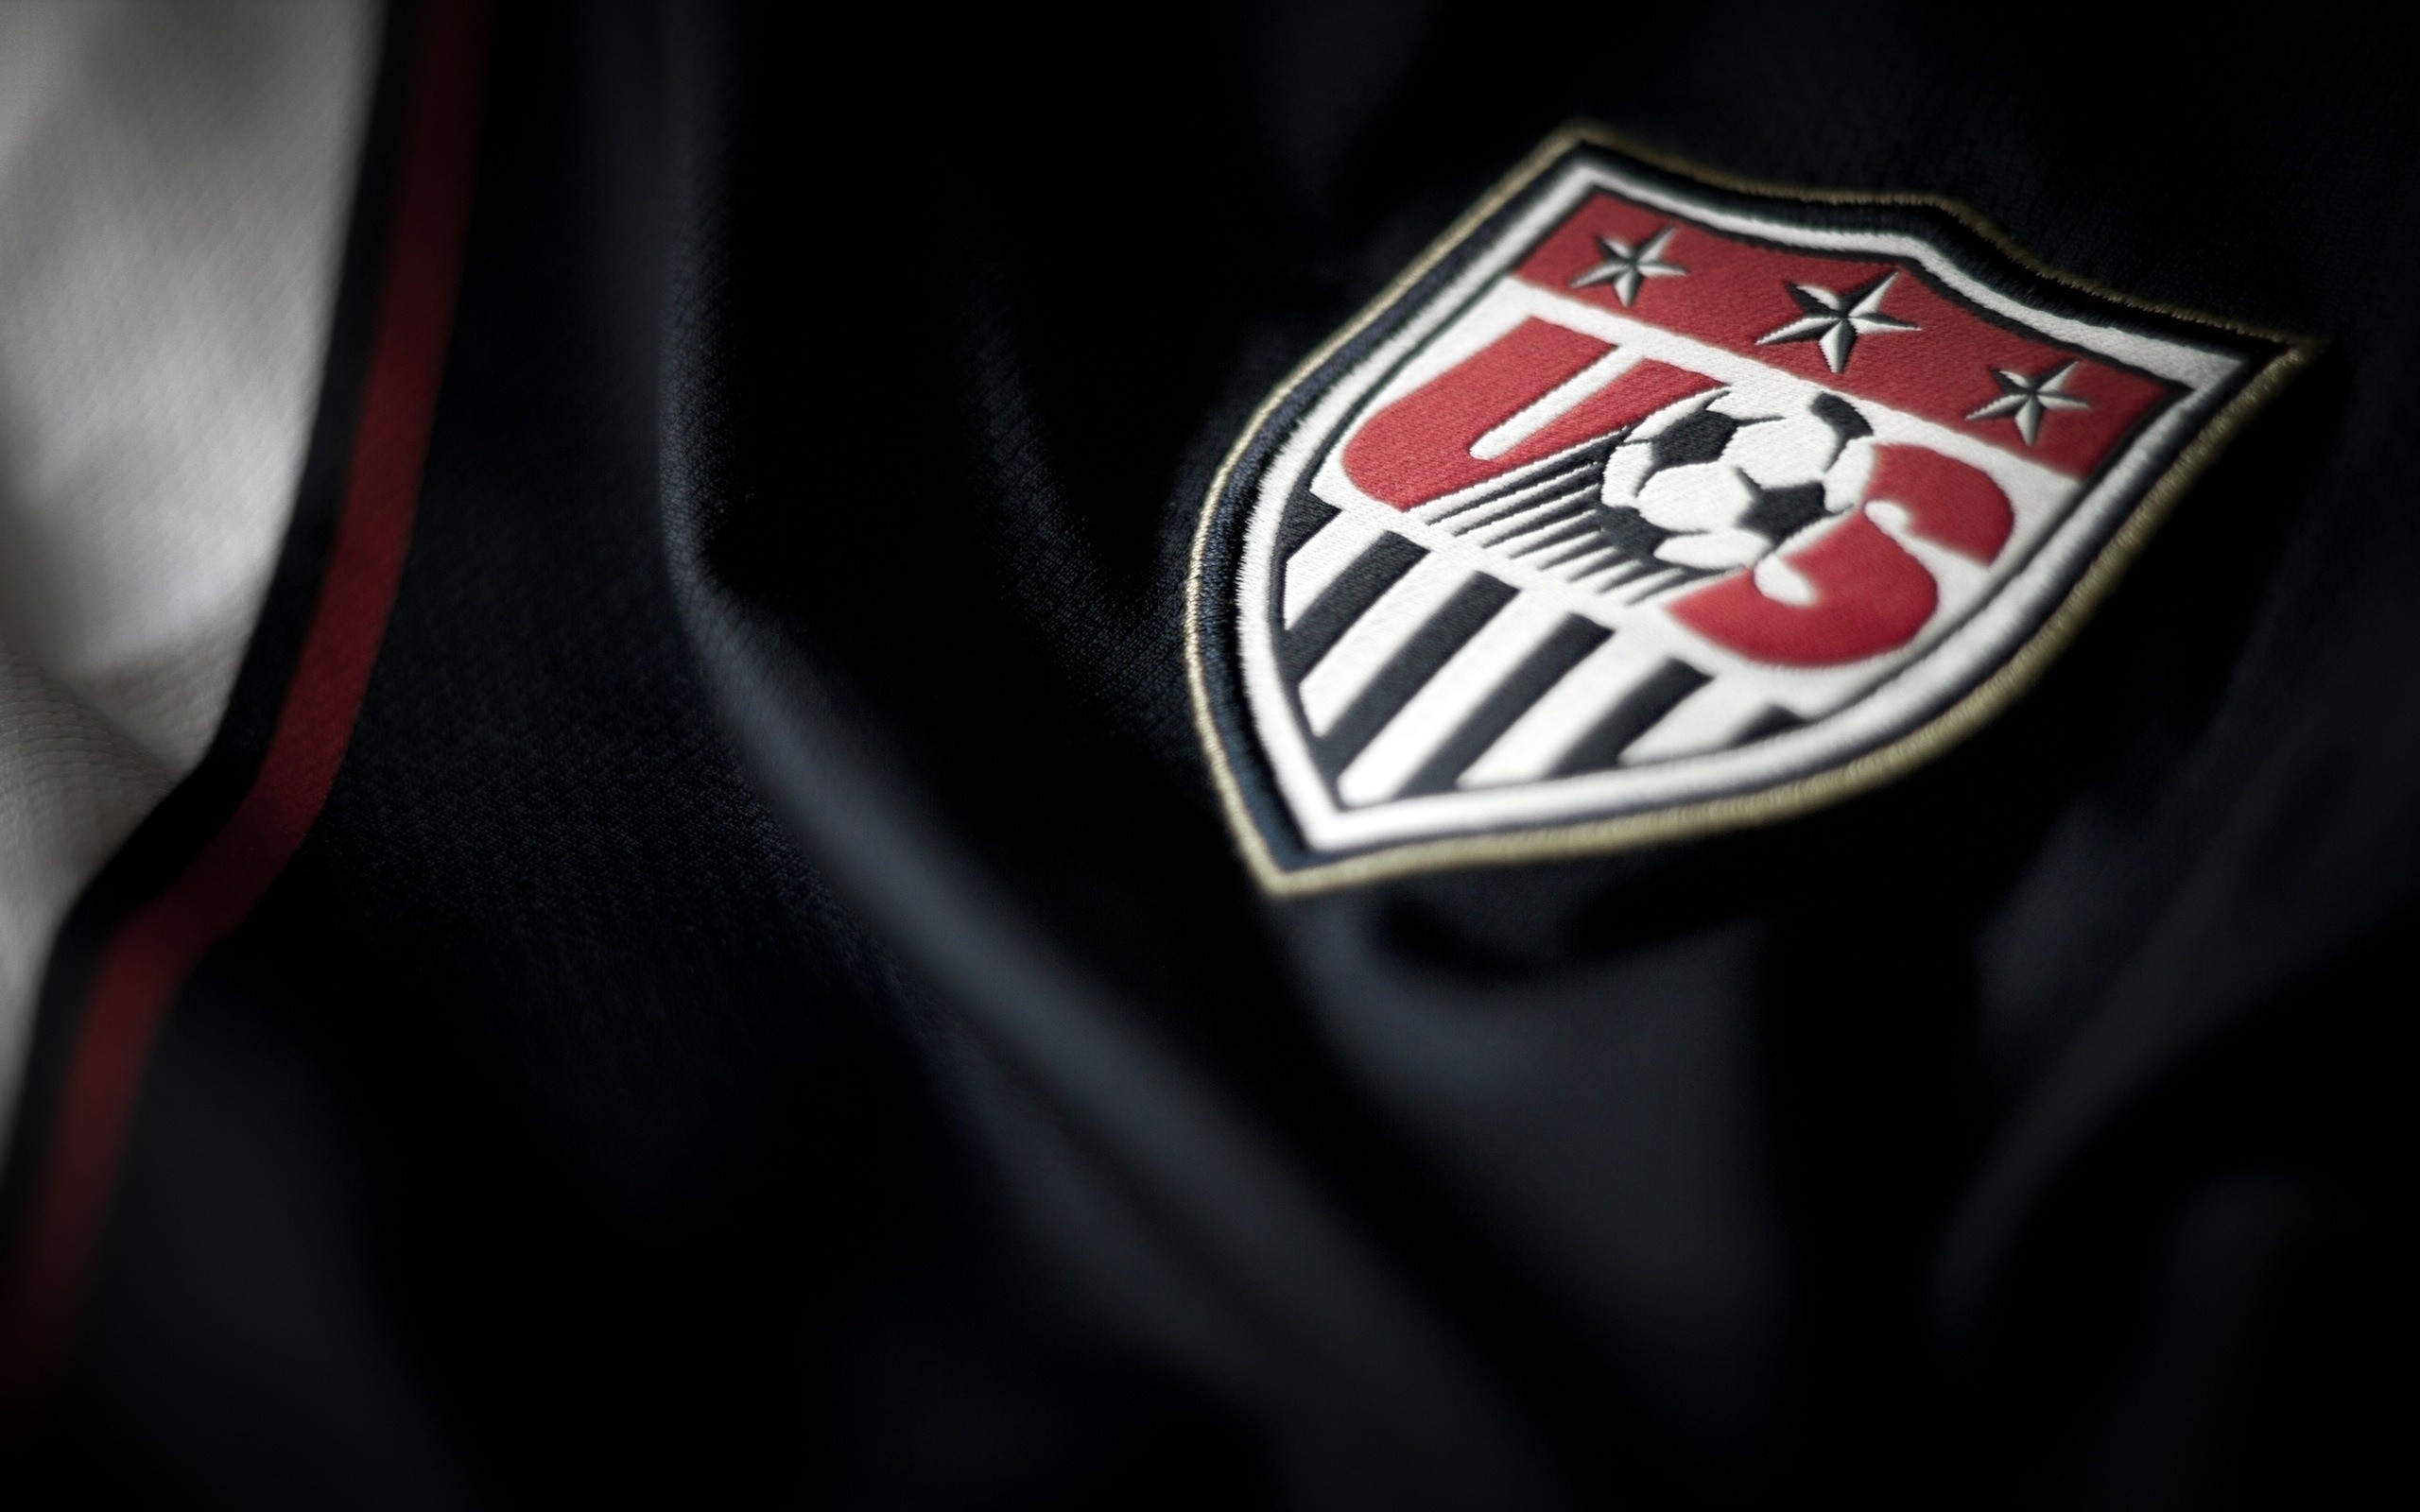 Download wallpaper United States national soccer team, USA, logo, emblem, football, blue fabric, texture for desktop with resolution 2560x1600. High Quality HD picture wallpaper